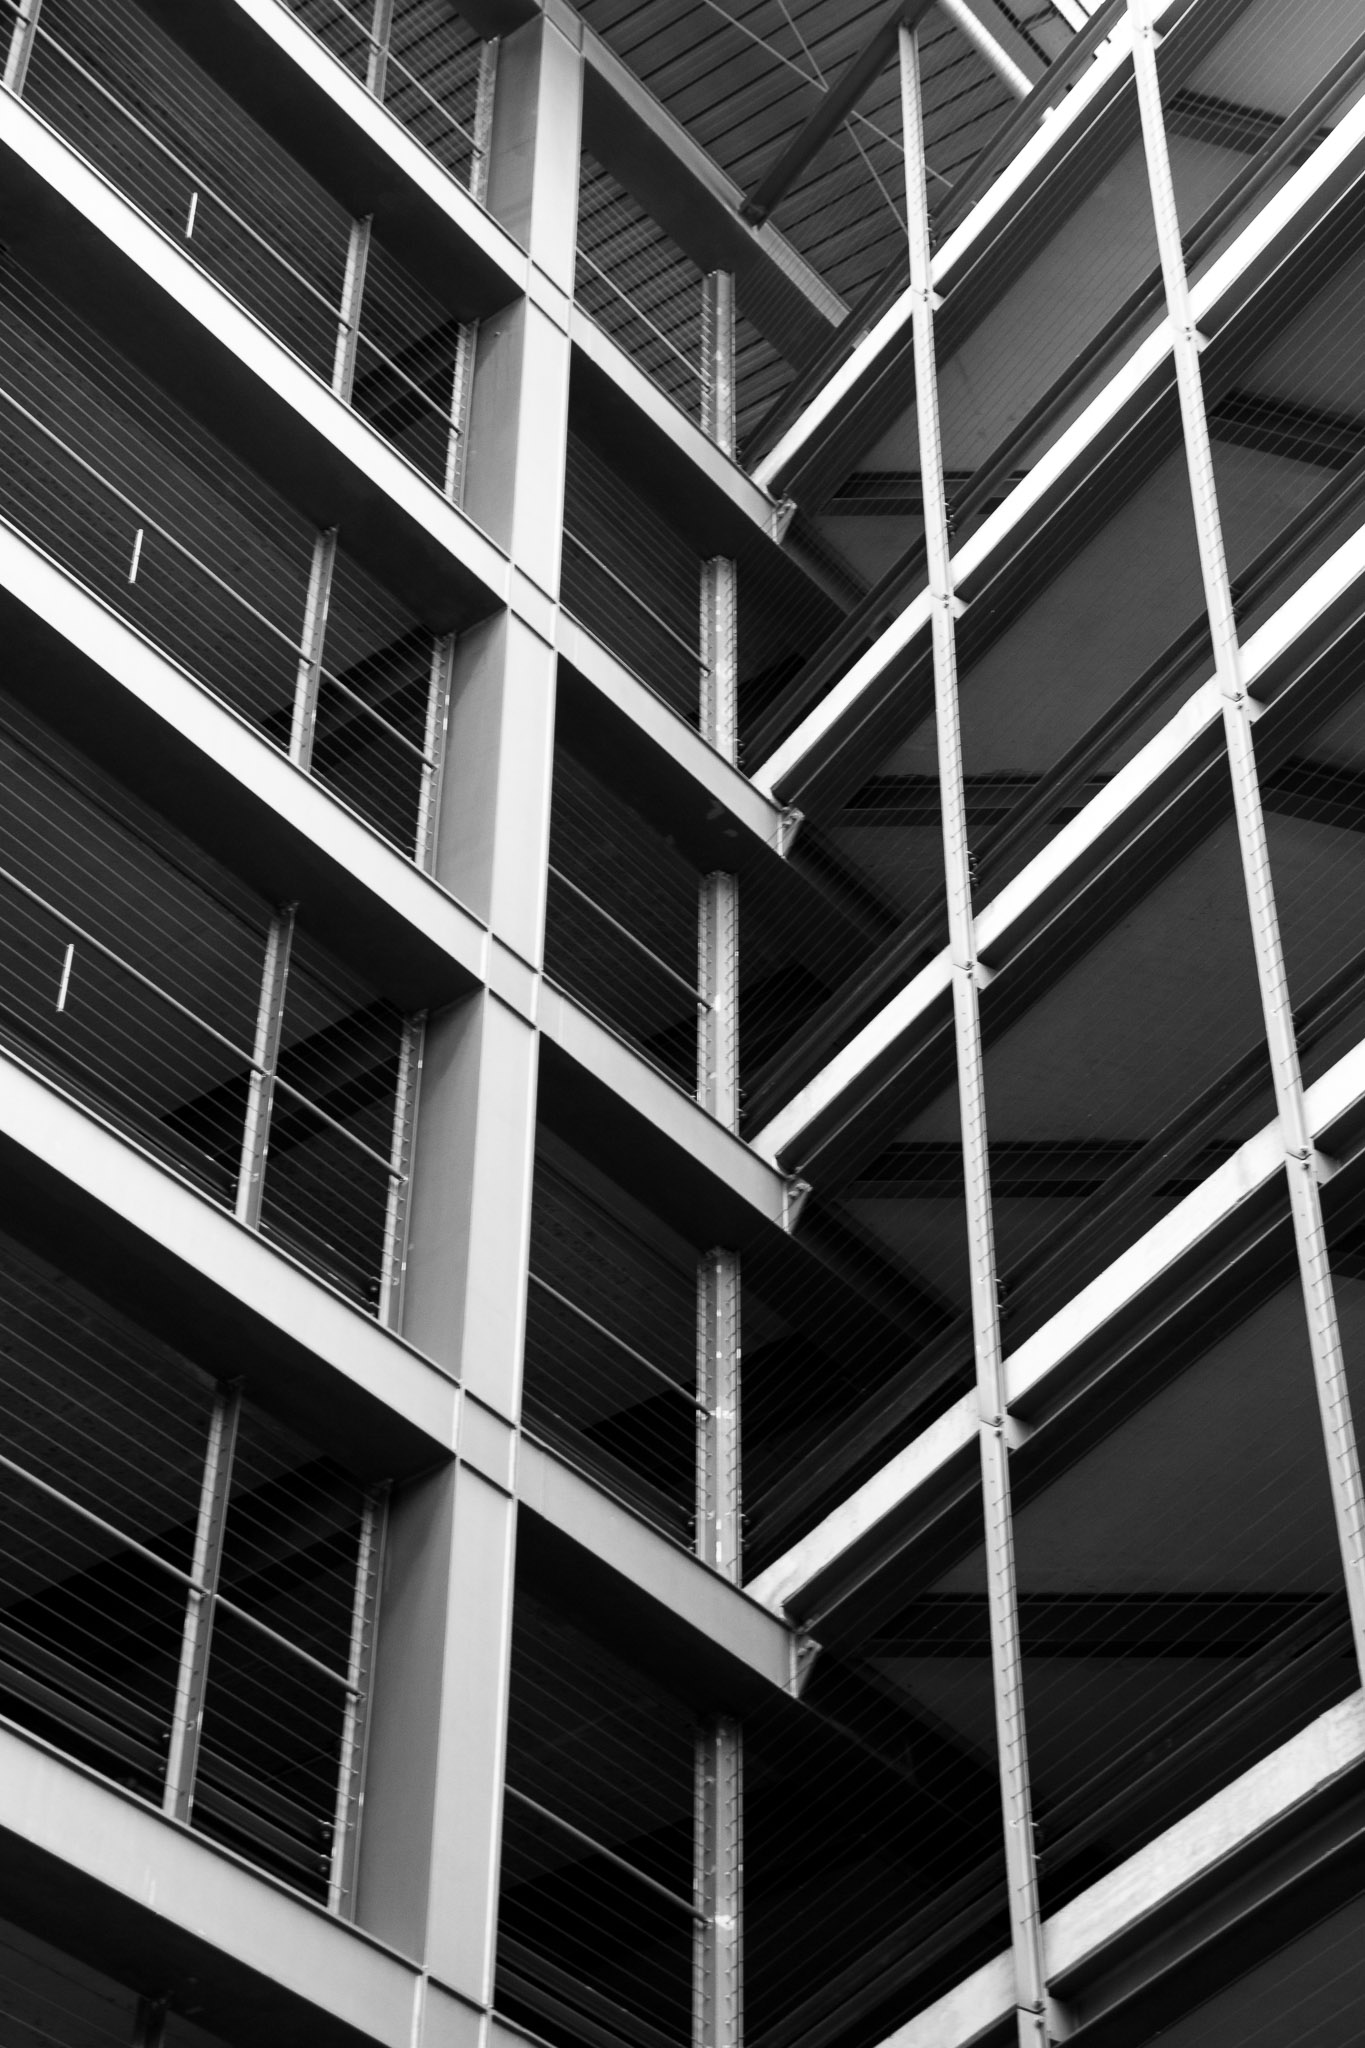 -Structural Parking Deck- Canon EOS 60D (Sigma 17-70mm F2.8-4 DC Macro C, 37 mm, f/8.0, 1/25s, ISO400)